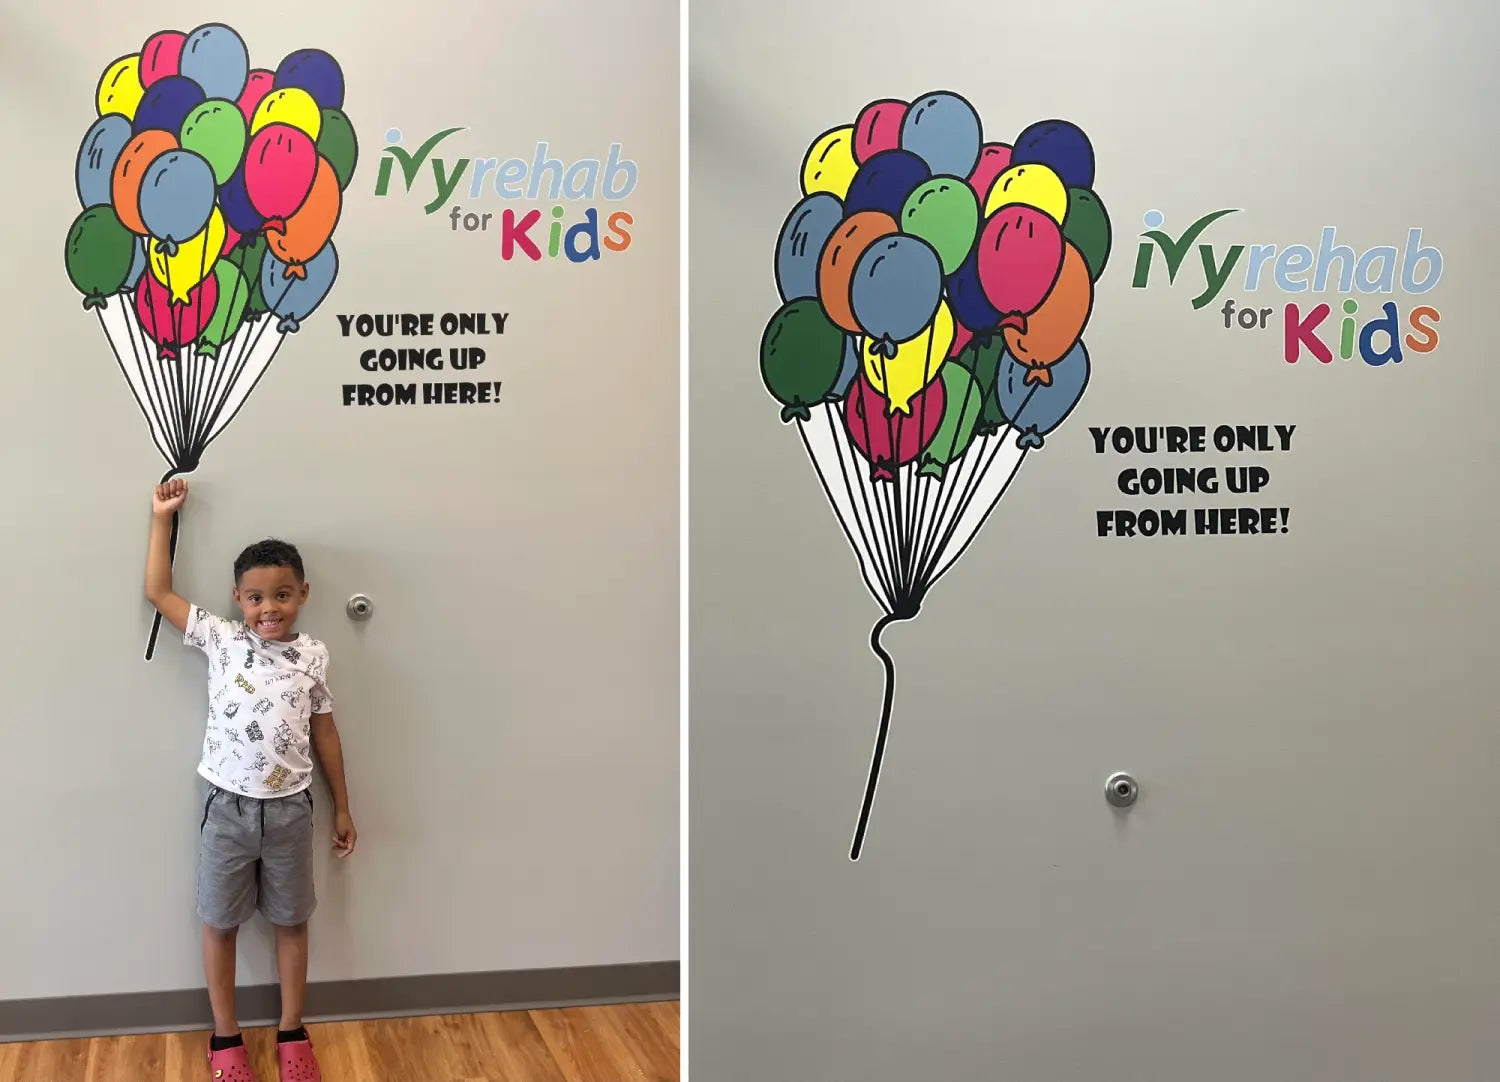 Custom vinyl balloon decals and business logo create a cheerful and inspiring message of hope in a children's rehab center.